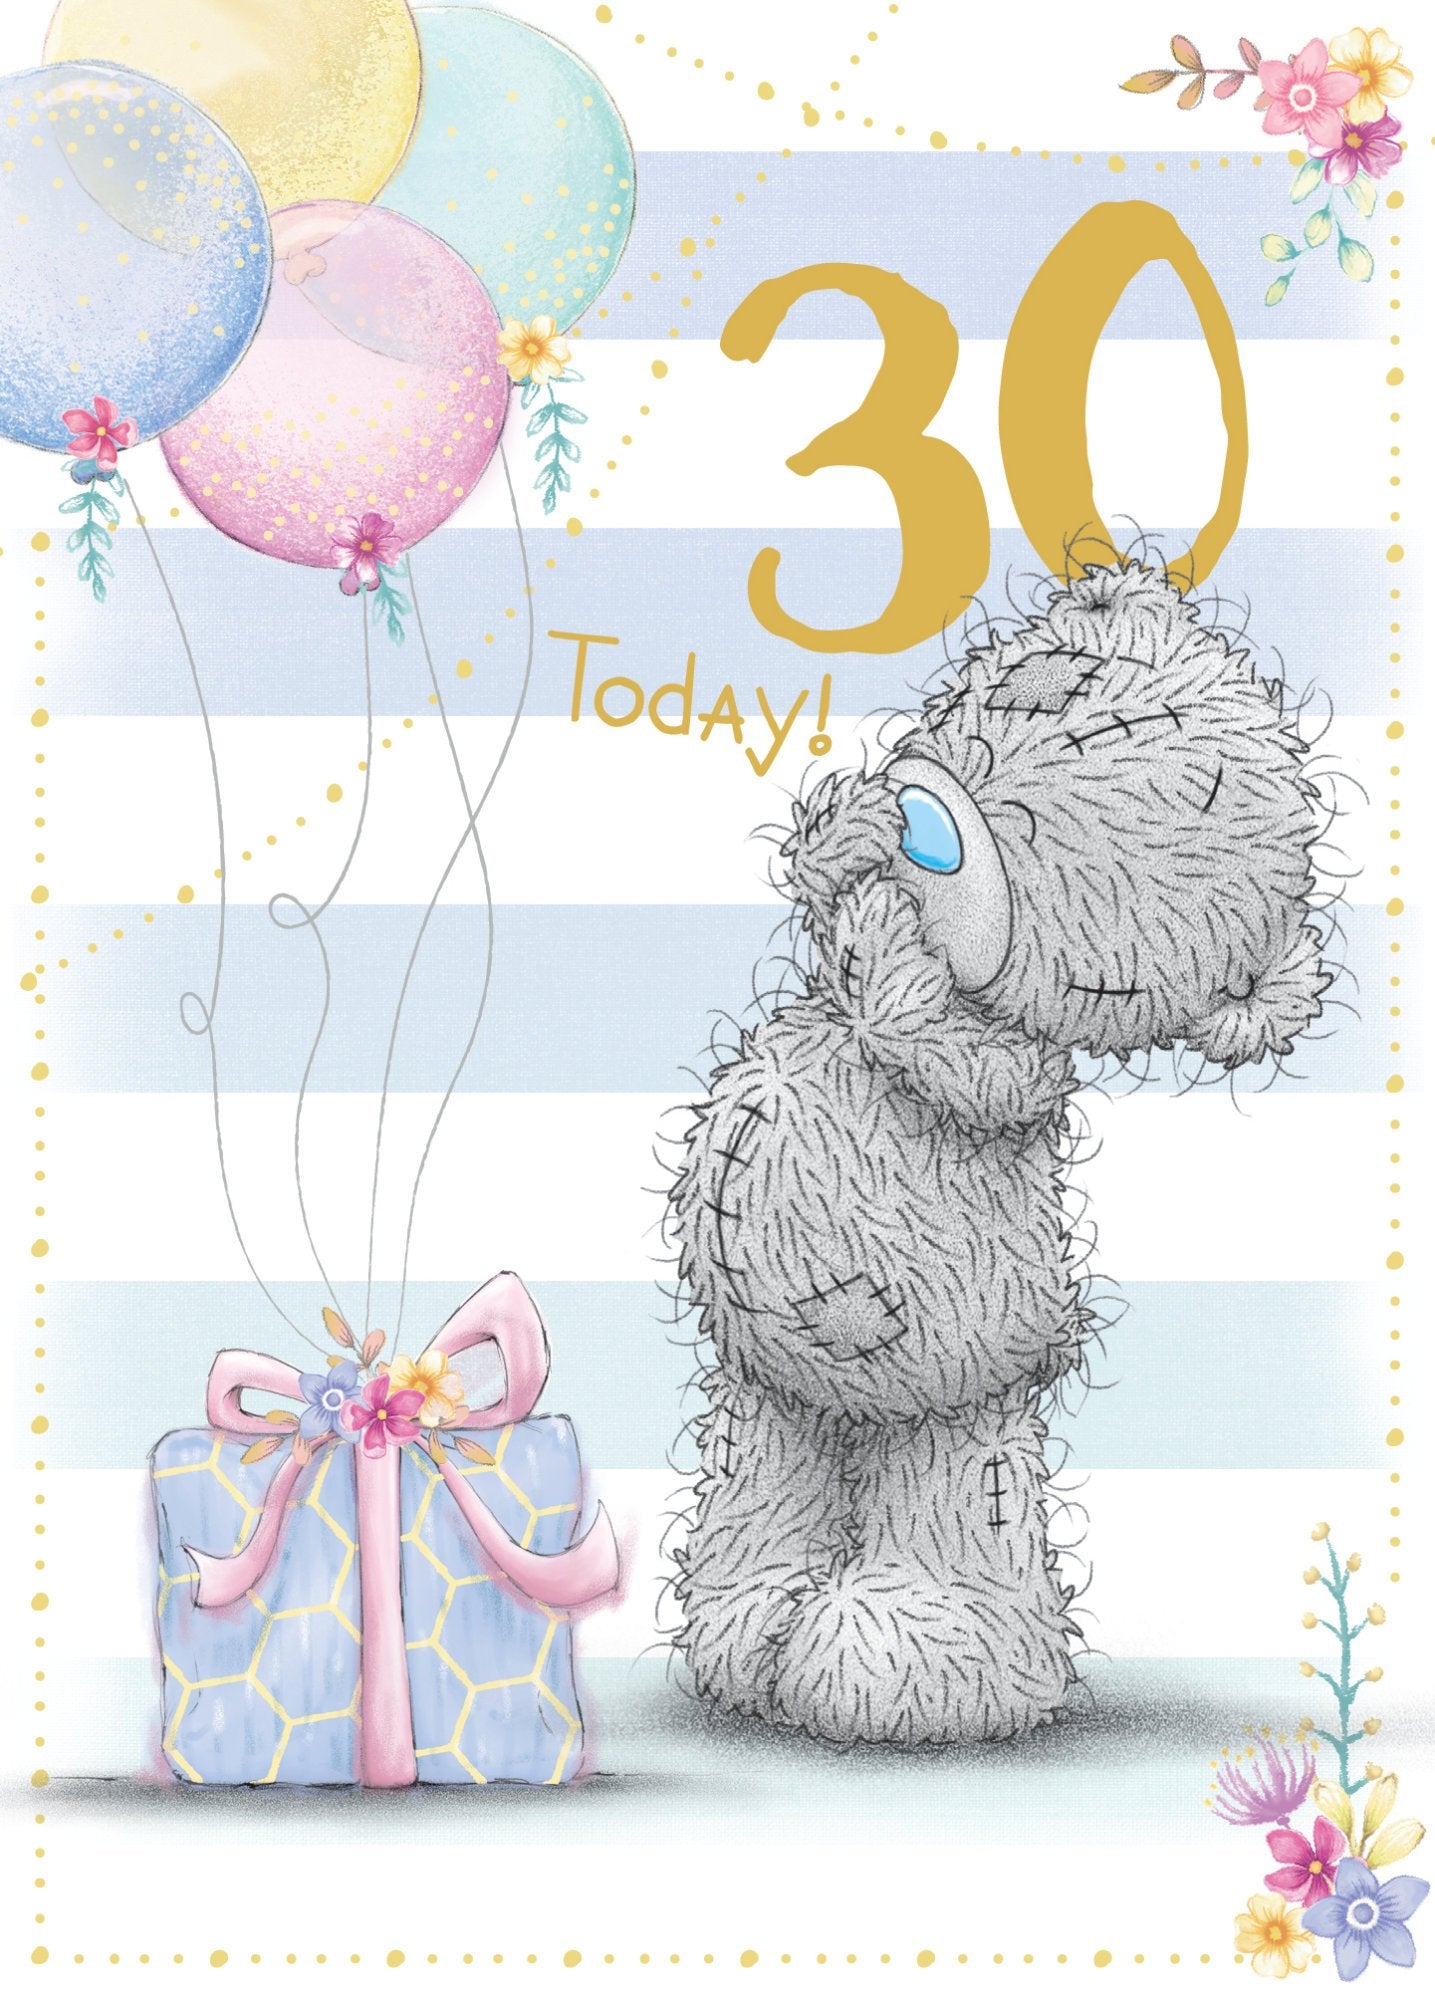 Photograph of 30th Birthday Teddy Balloons Greetings Card at Nicole's Shop